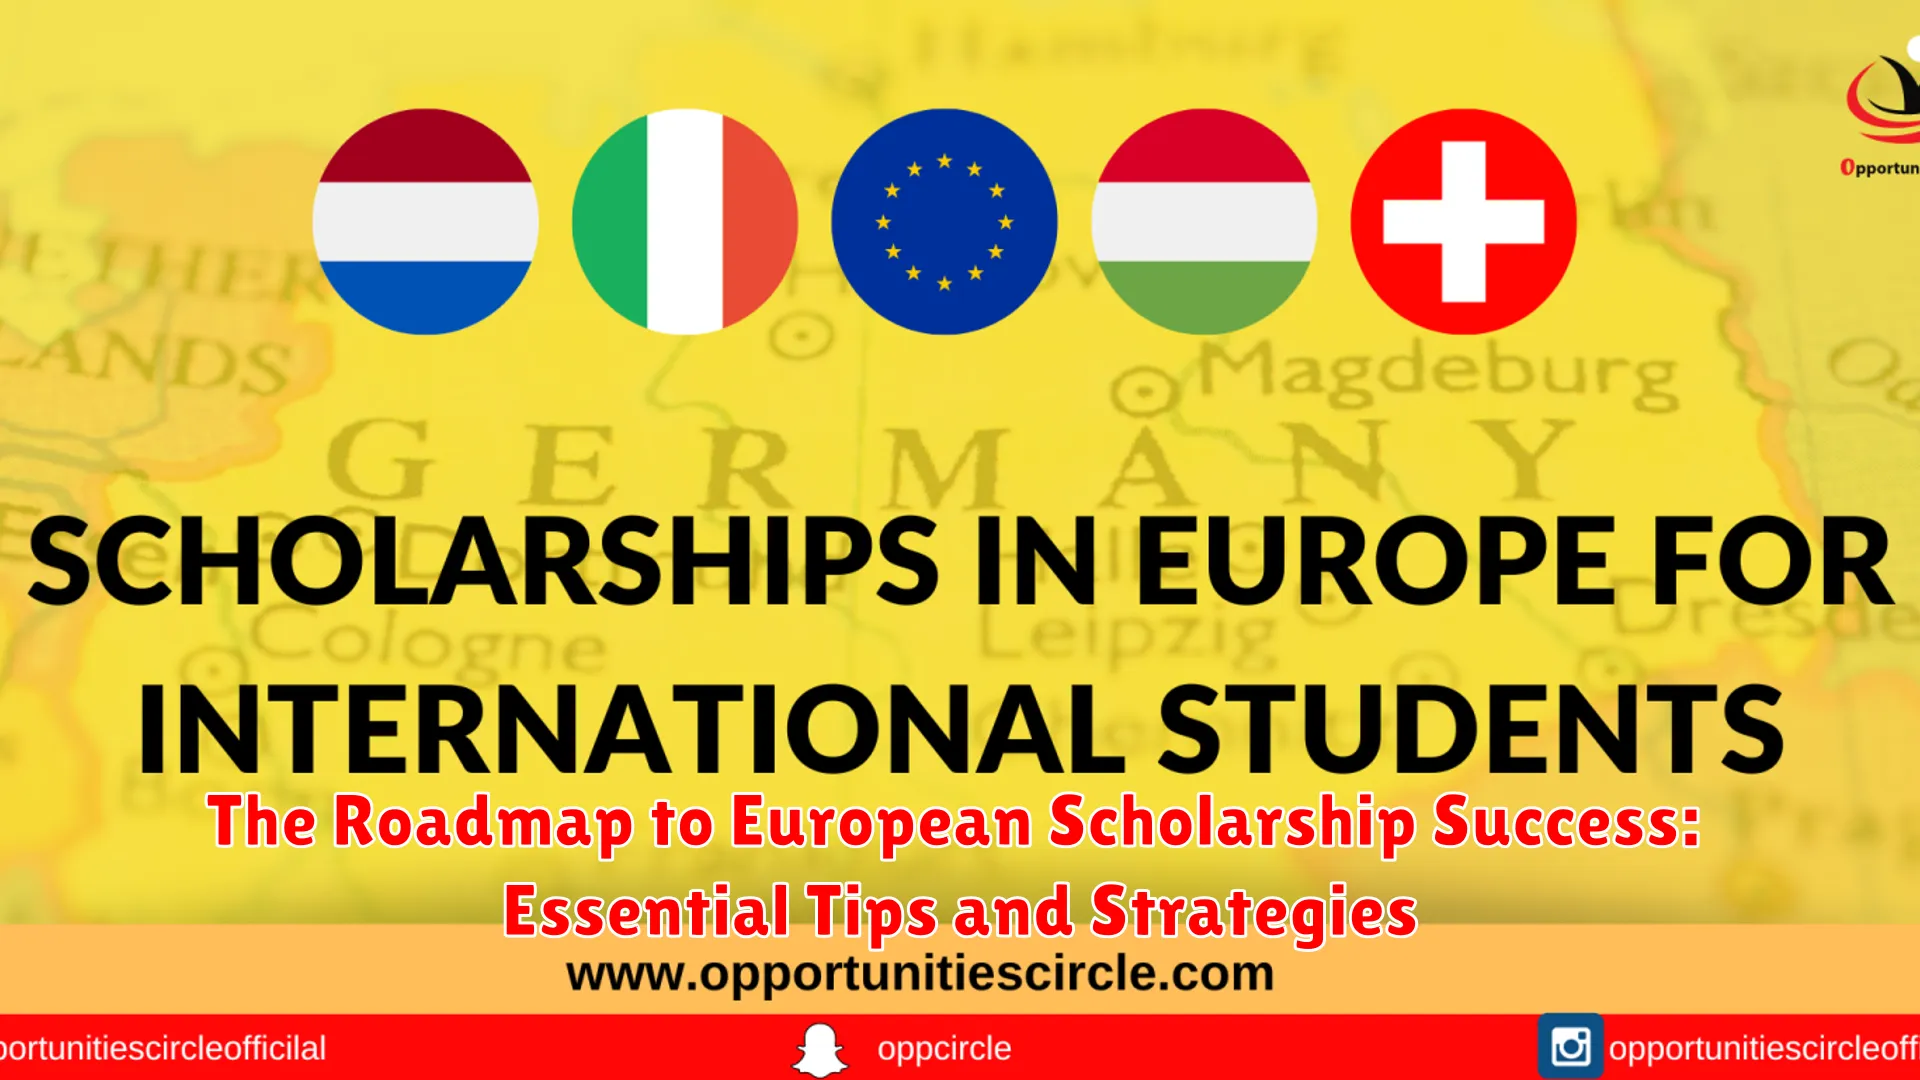 The Roadmap to European Scholarship Success: Essential Tips and Strategies